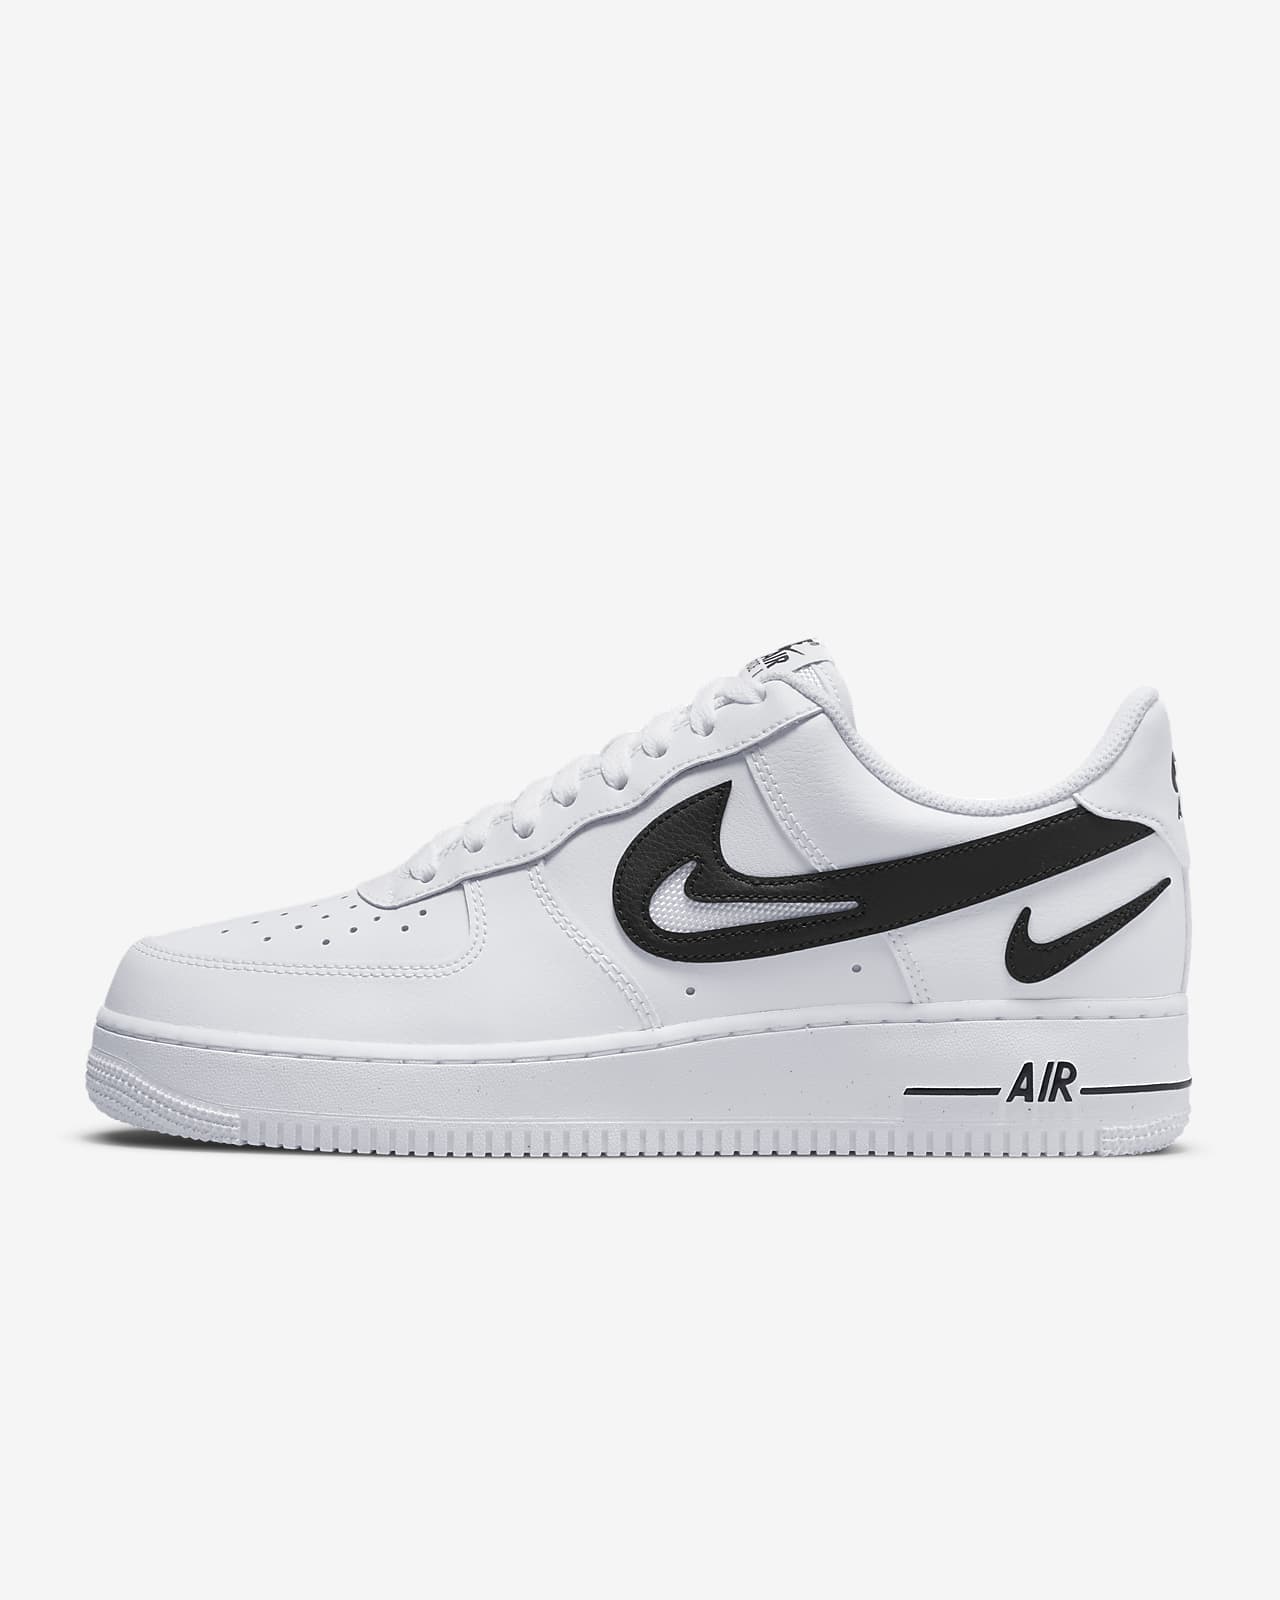 undefined | Nike Air Force 1 '07